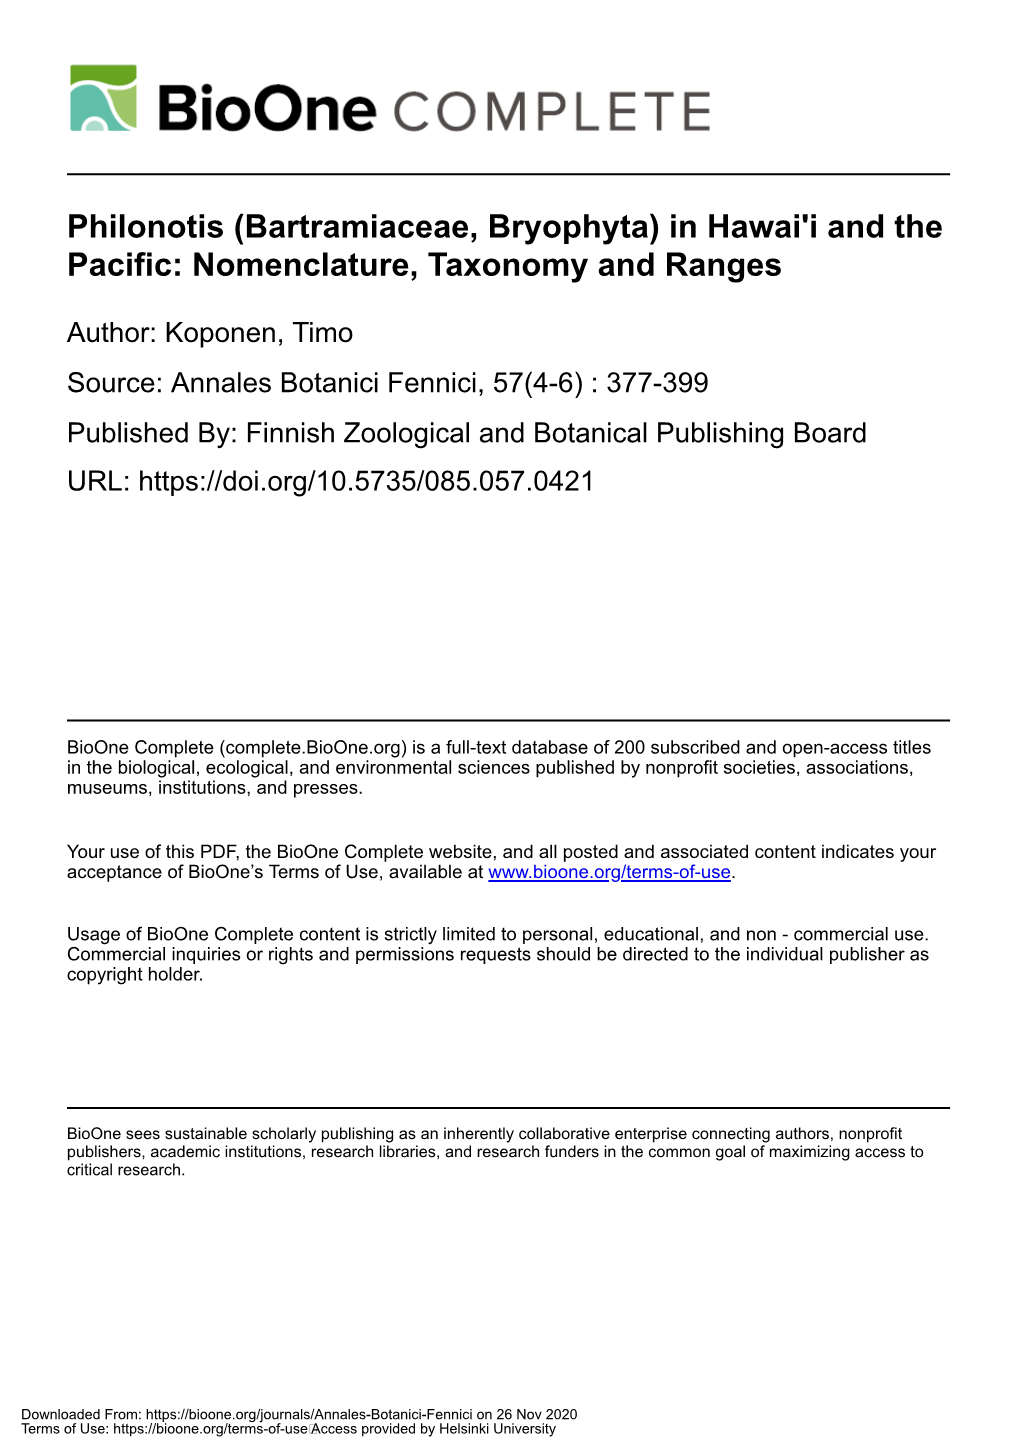 Philonotis (Bartramiaceae, Bryophyta) in Hawai'i and the Pacific: Nomenclature, Taxonomy and Ranges